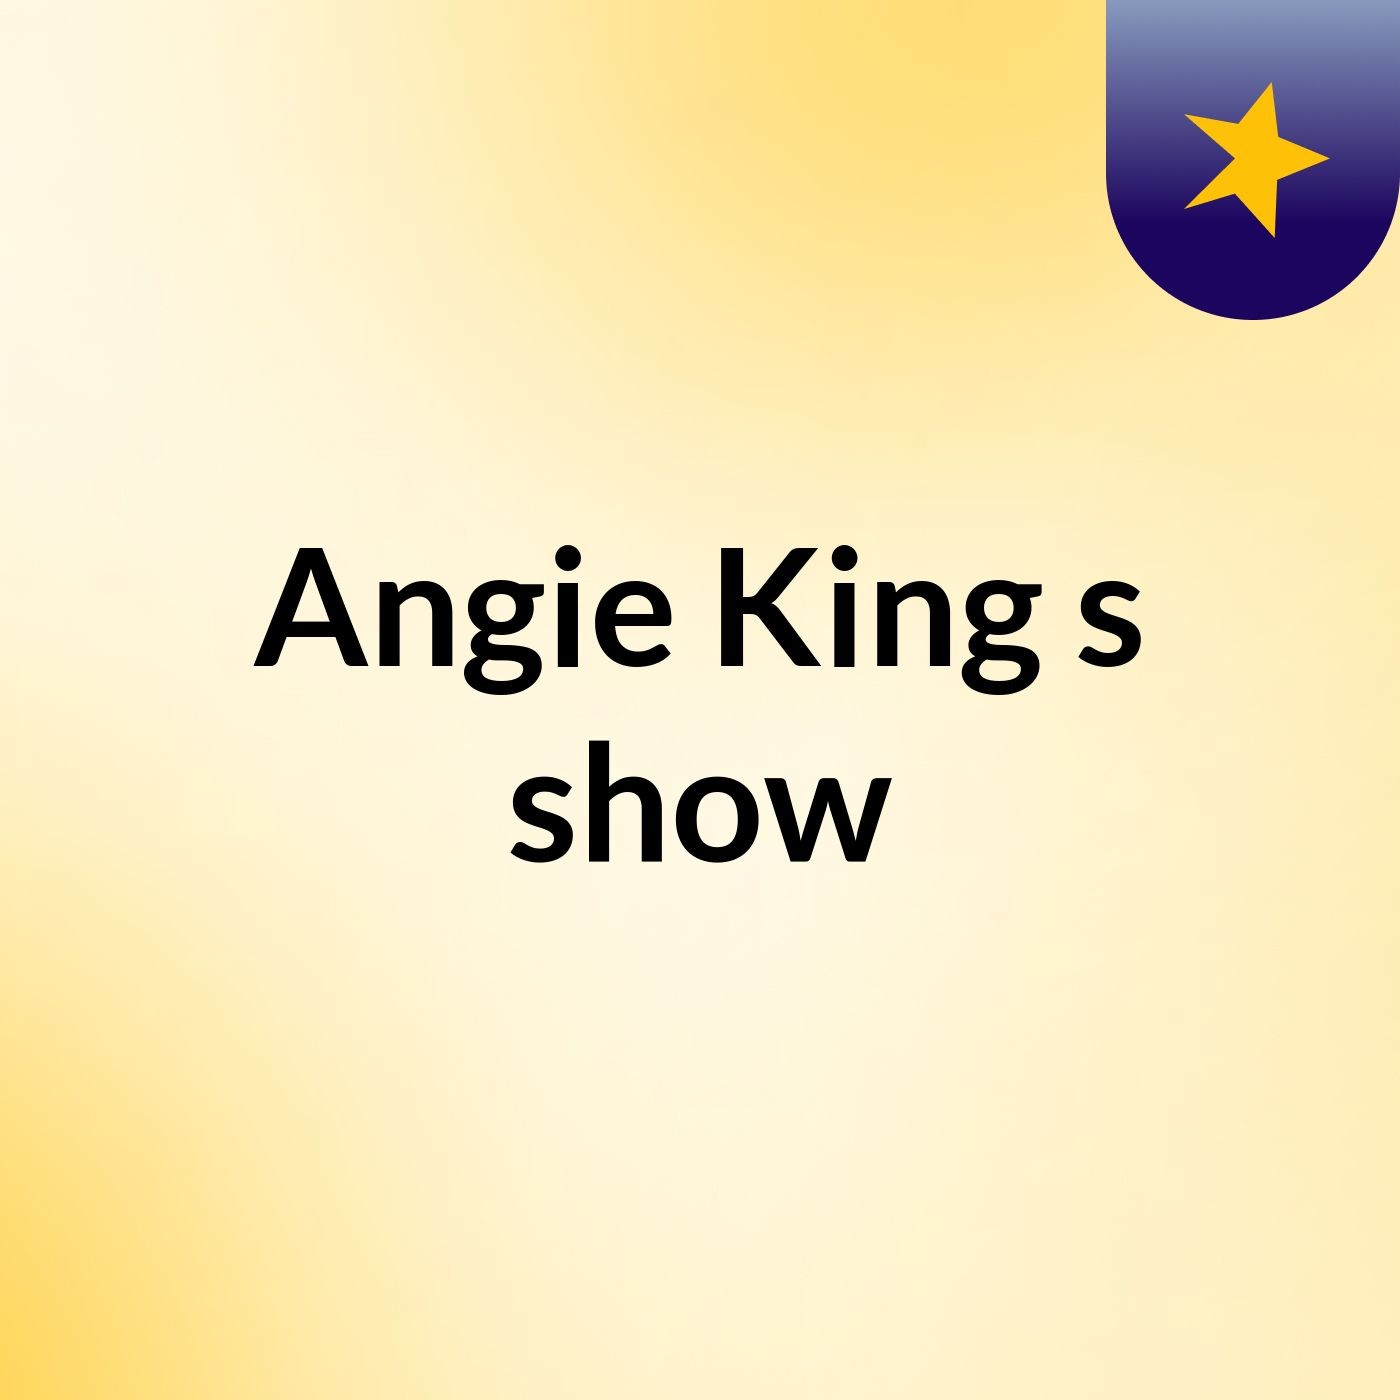 Angie King's show